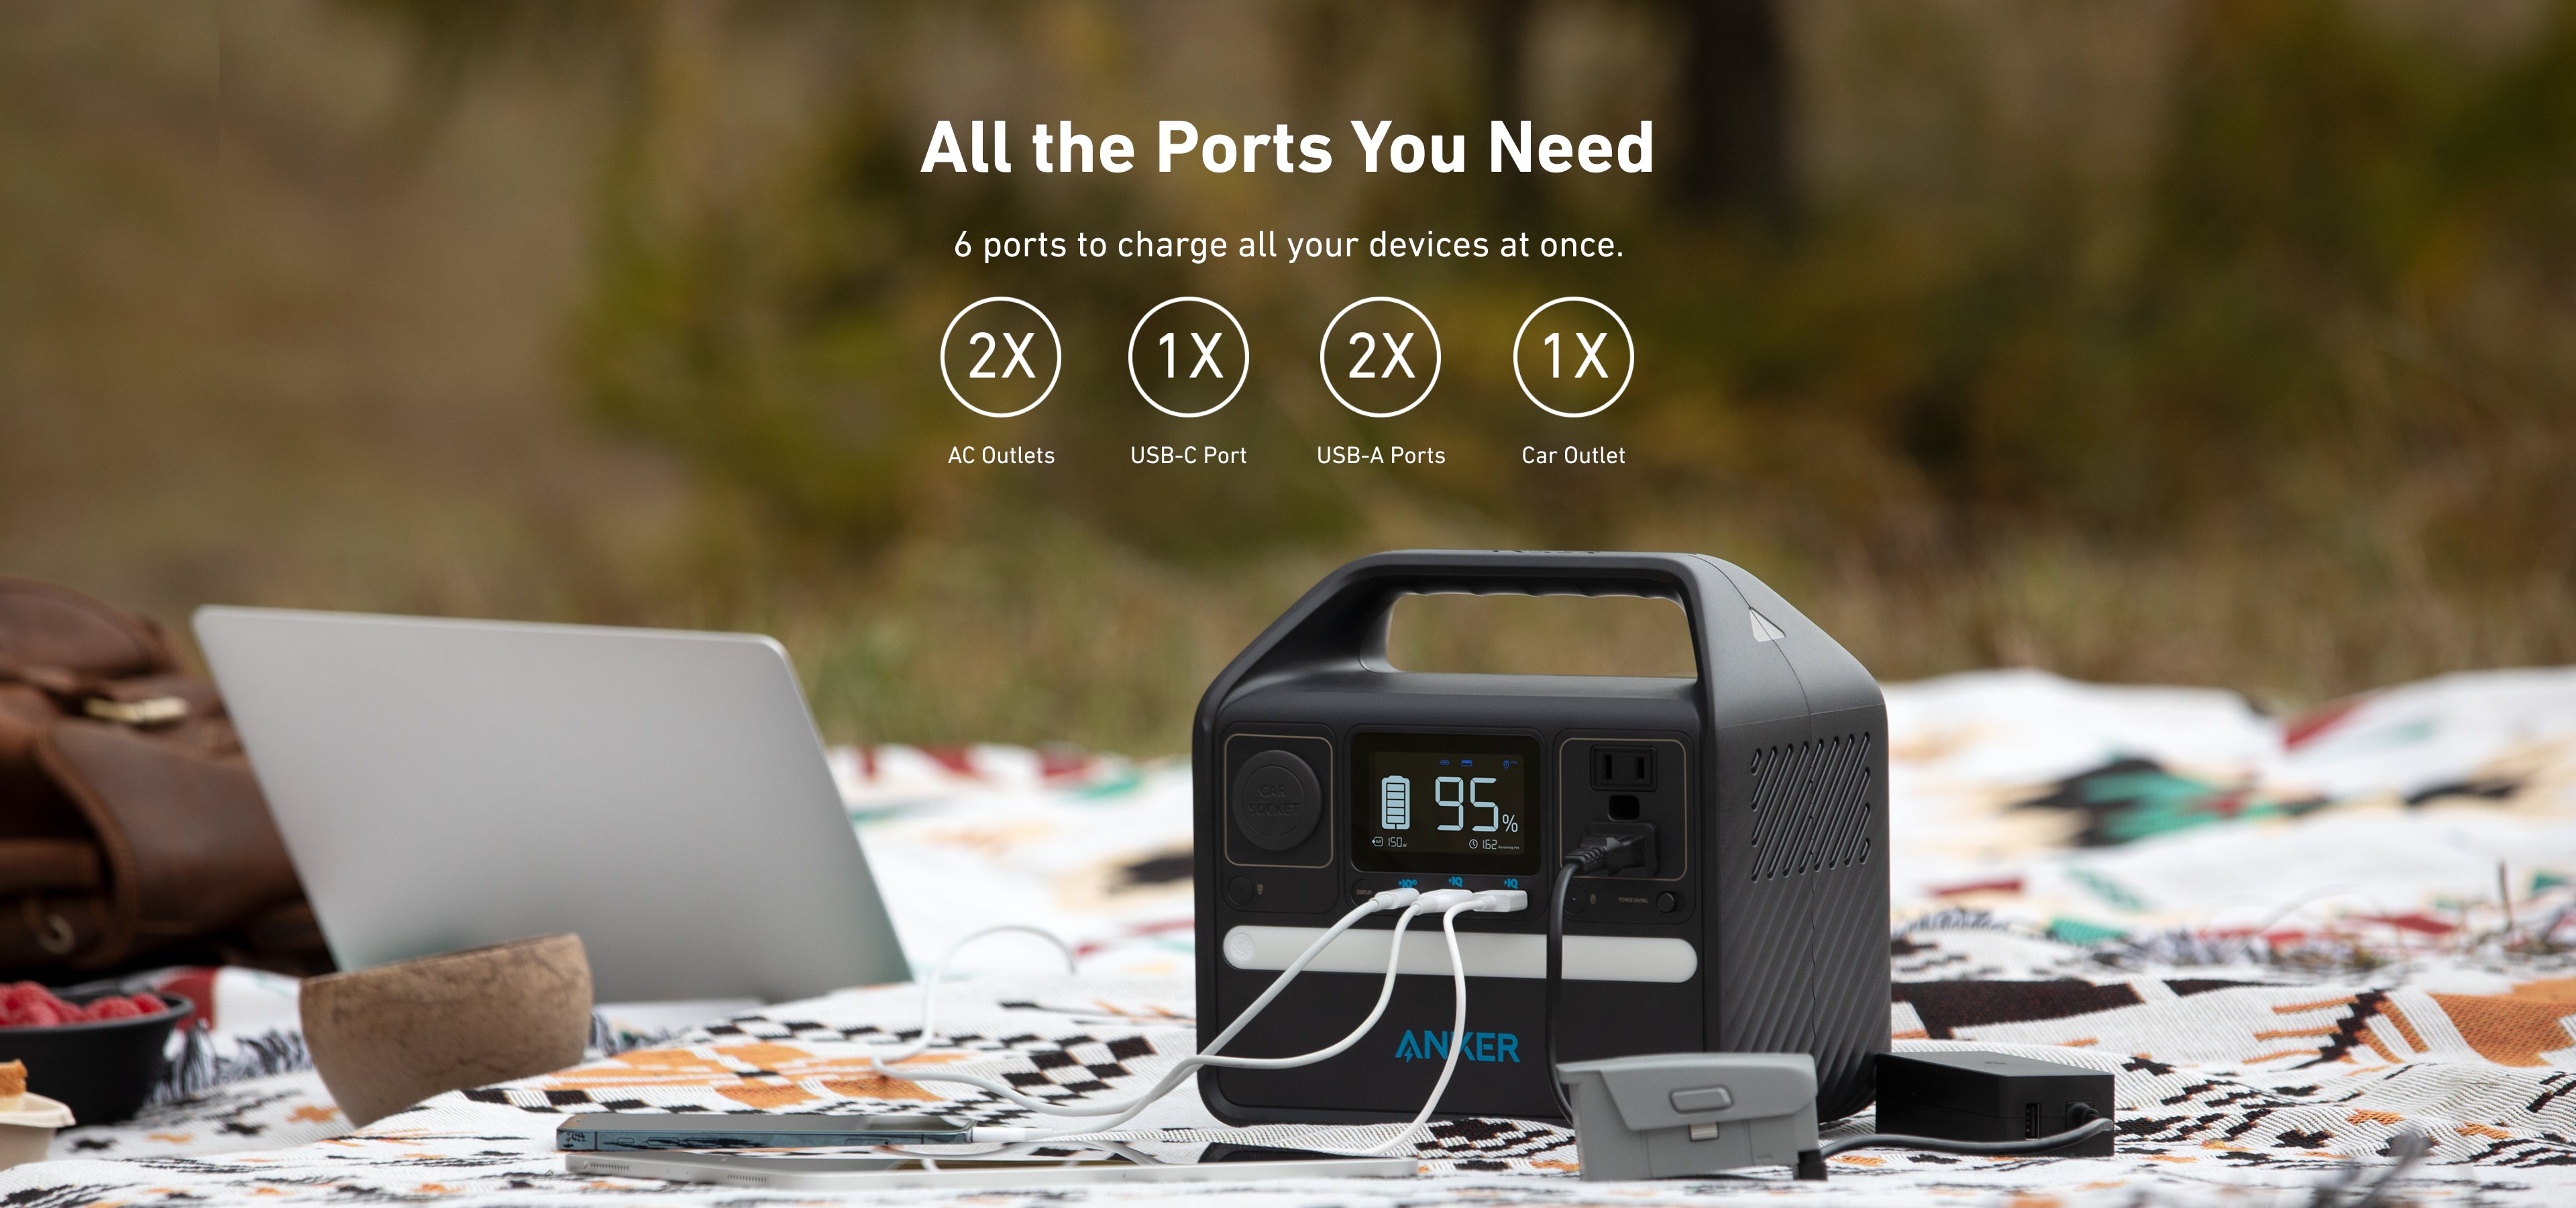 Anker 521 PowerHouse—Power Your Next Trip - Anker US